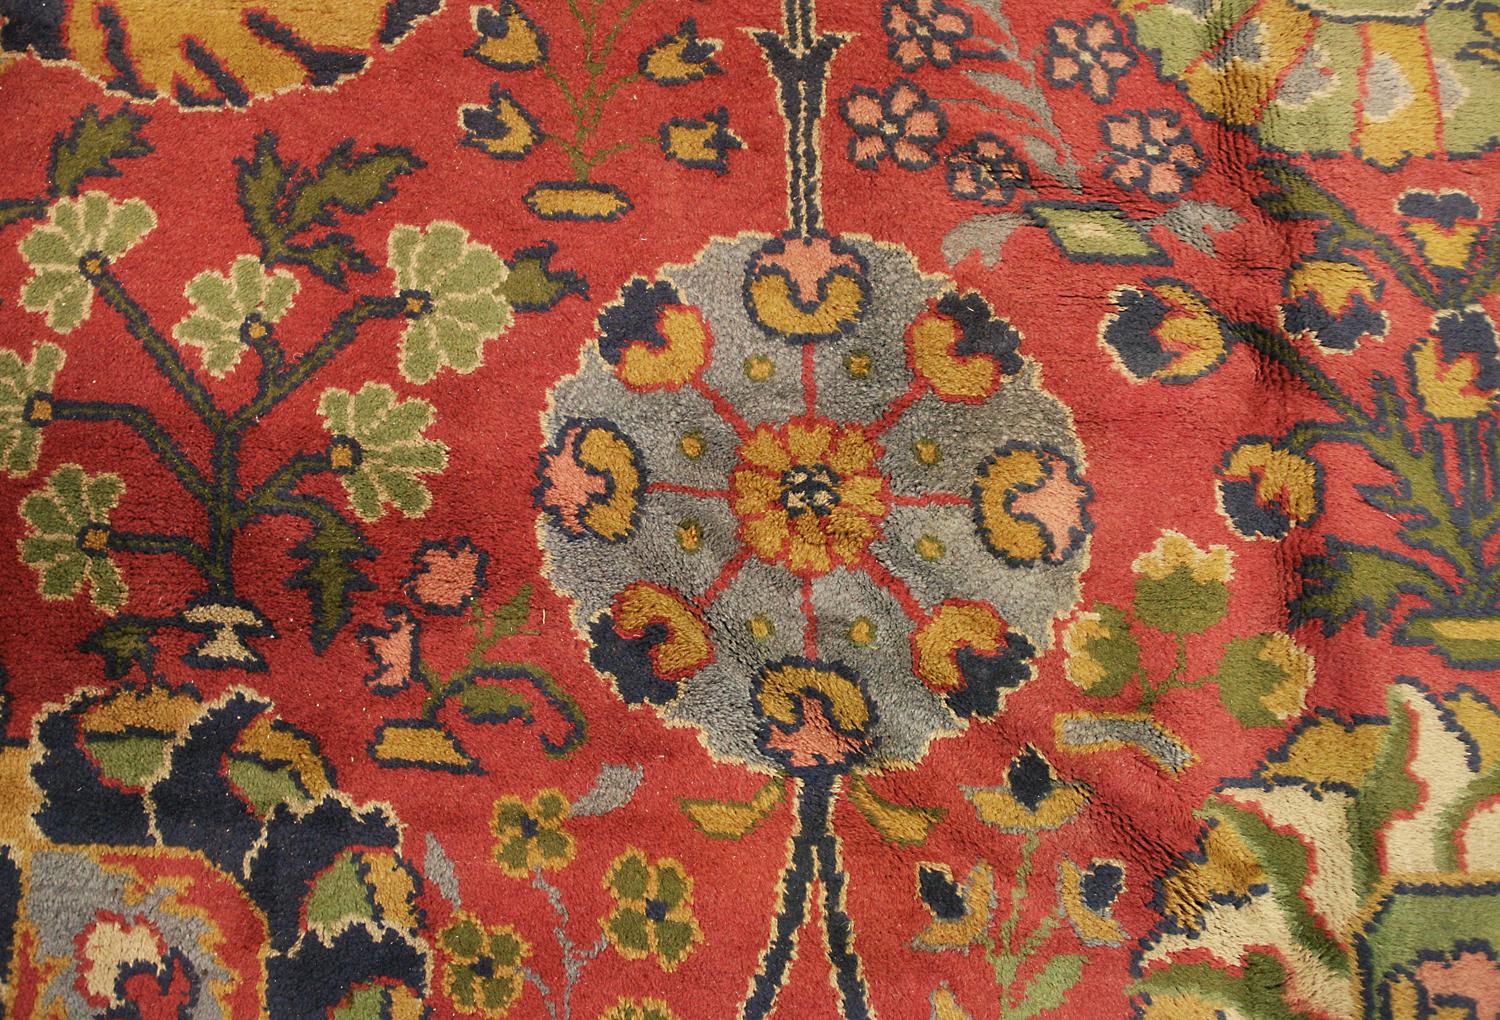 Circa 1920 Oversized Antique English Wool Donegal Carpet, Red Field For Sale 1